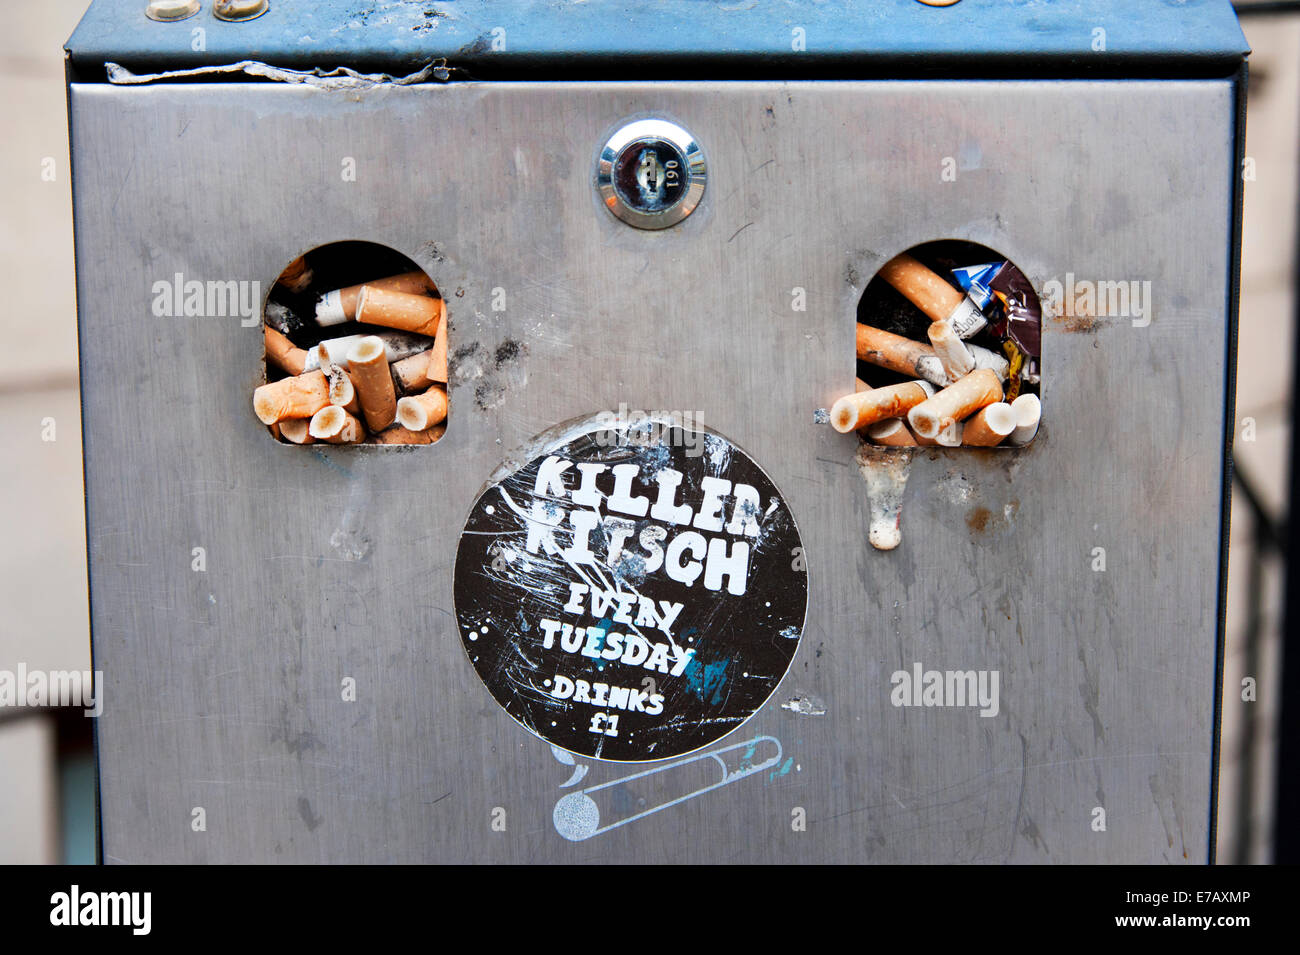 Overflowing bin / street container for cigarette butts, Glasgow City Centre, Scotland Stock Photo